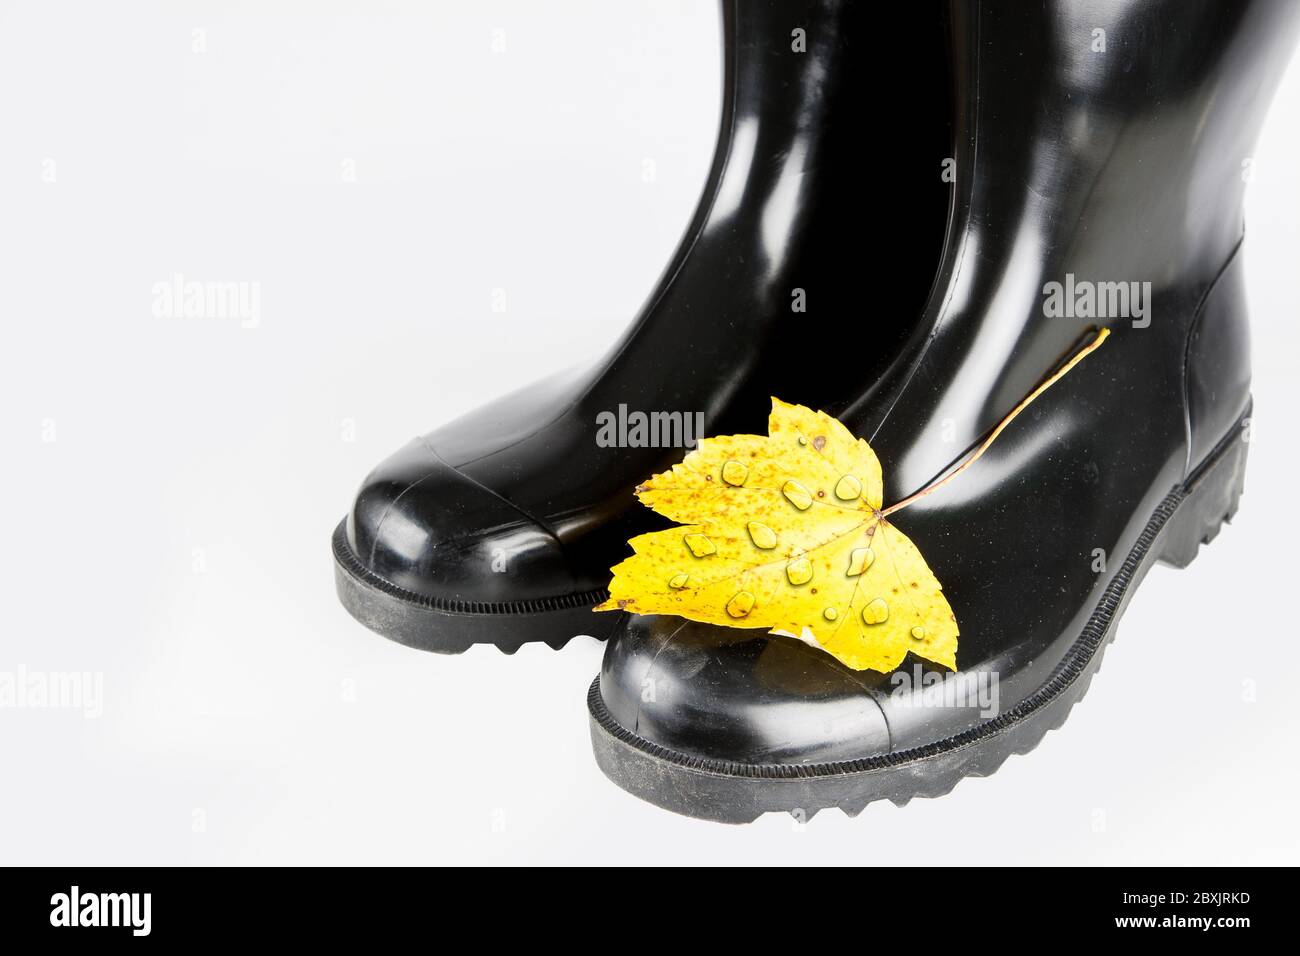 Autumn time is rubber boot time. A yellow discolored autumn leaves with drops of water sticks on a black rubber boott in front of a white background. Stock Photo